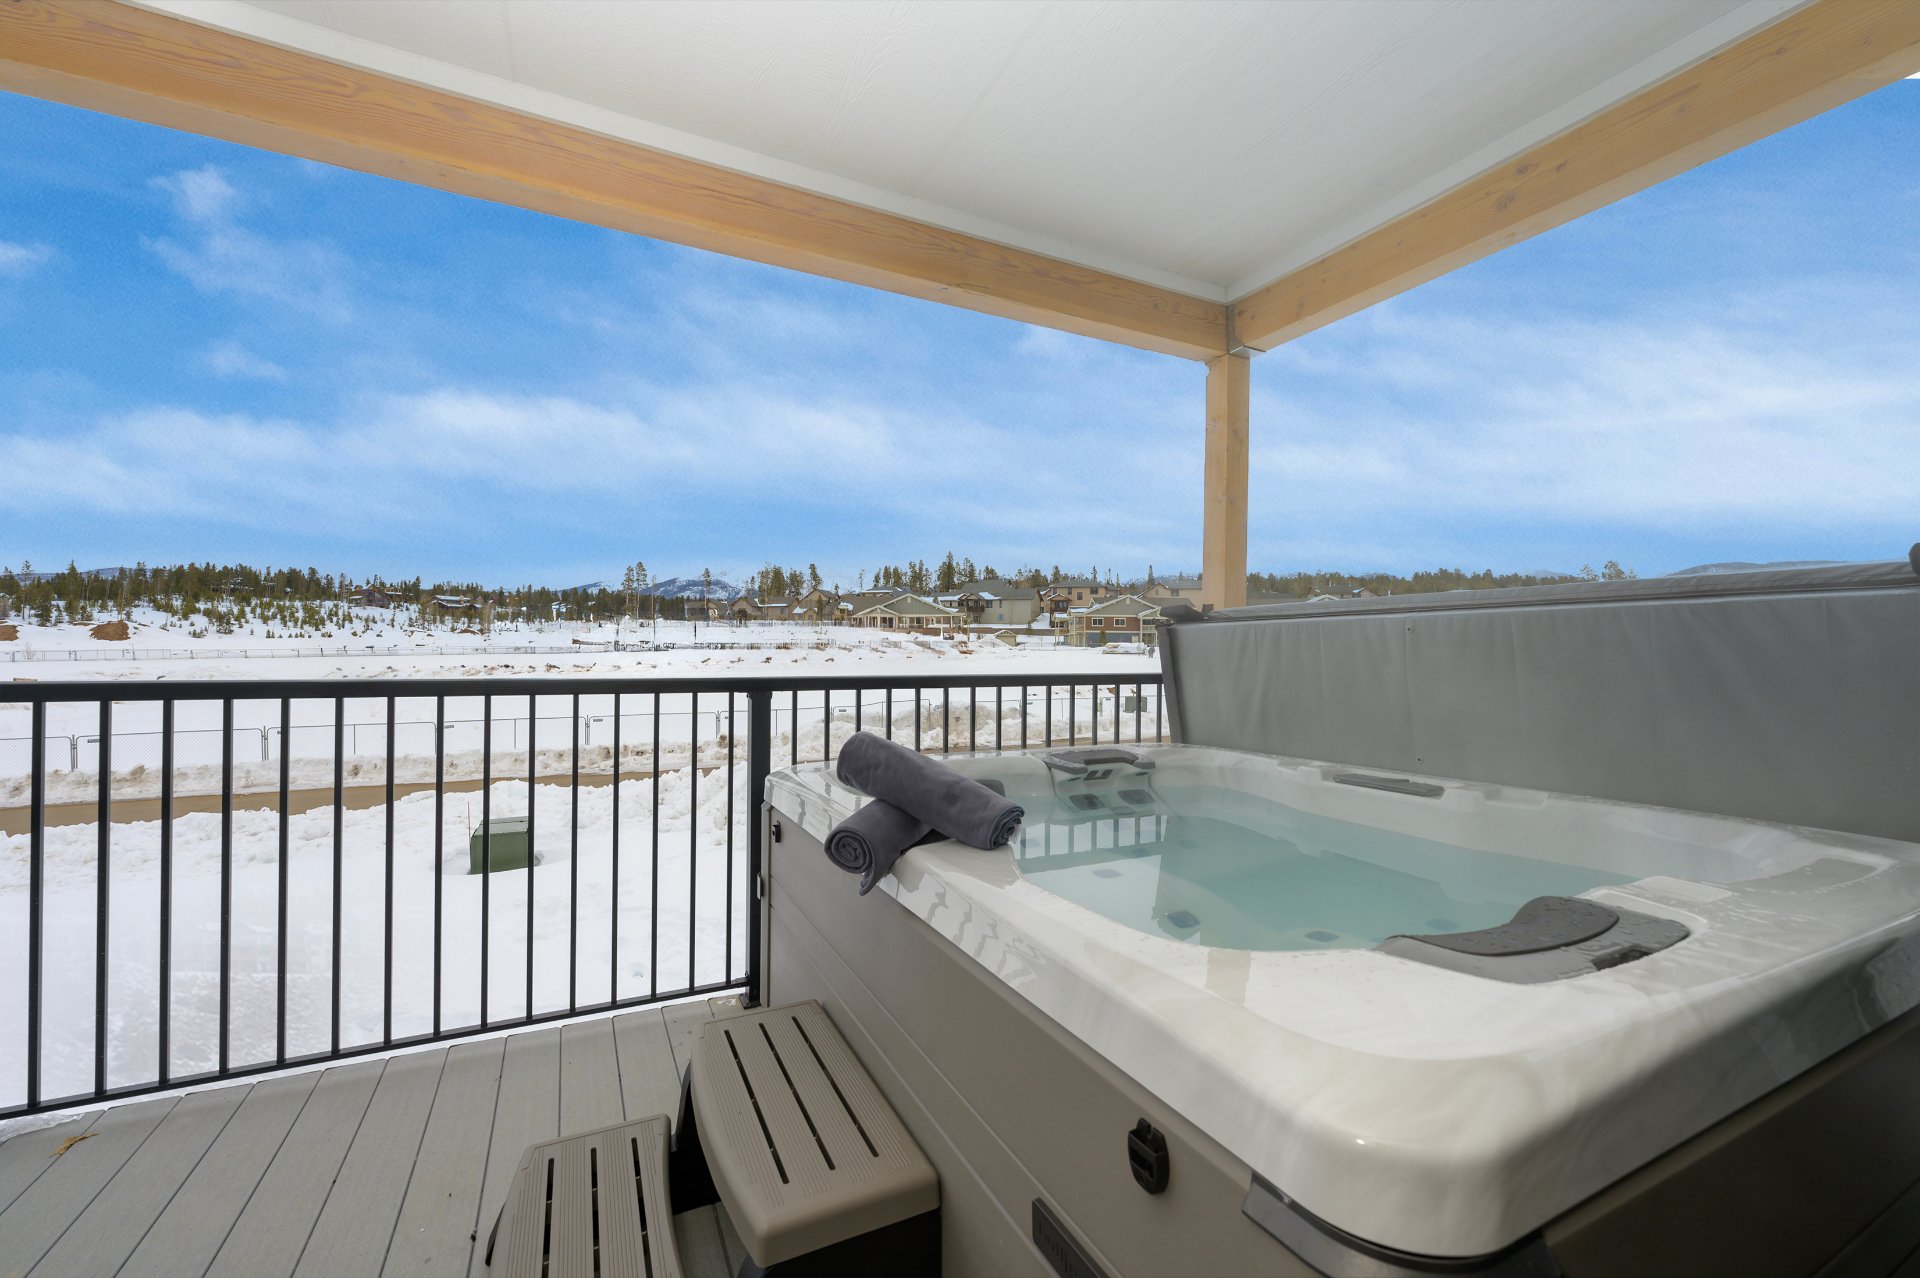 Brand New Condo, High Quality, Private Hot Tub, Sleeps 6 in beds + Sleeper Sofa